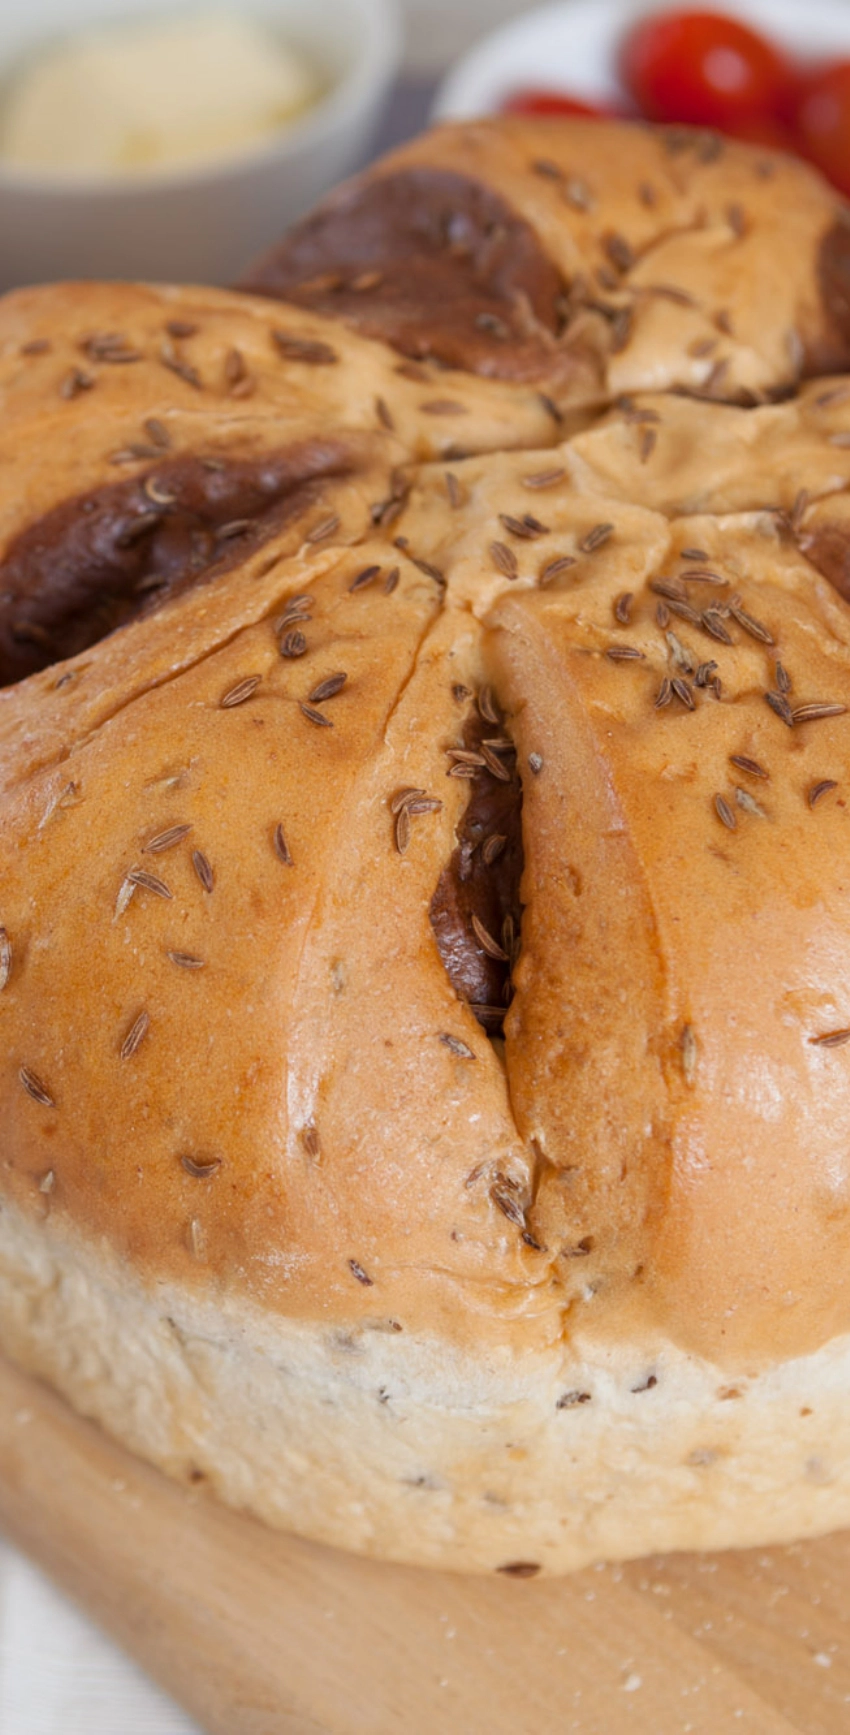 Close-up of a round loaf of bread with a golden-brown crust, sprinkled with caraway seeds, showing deep scored sections. Background slightly blurred with a hint of cherry tomatoes and a small dish.